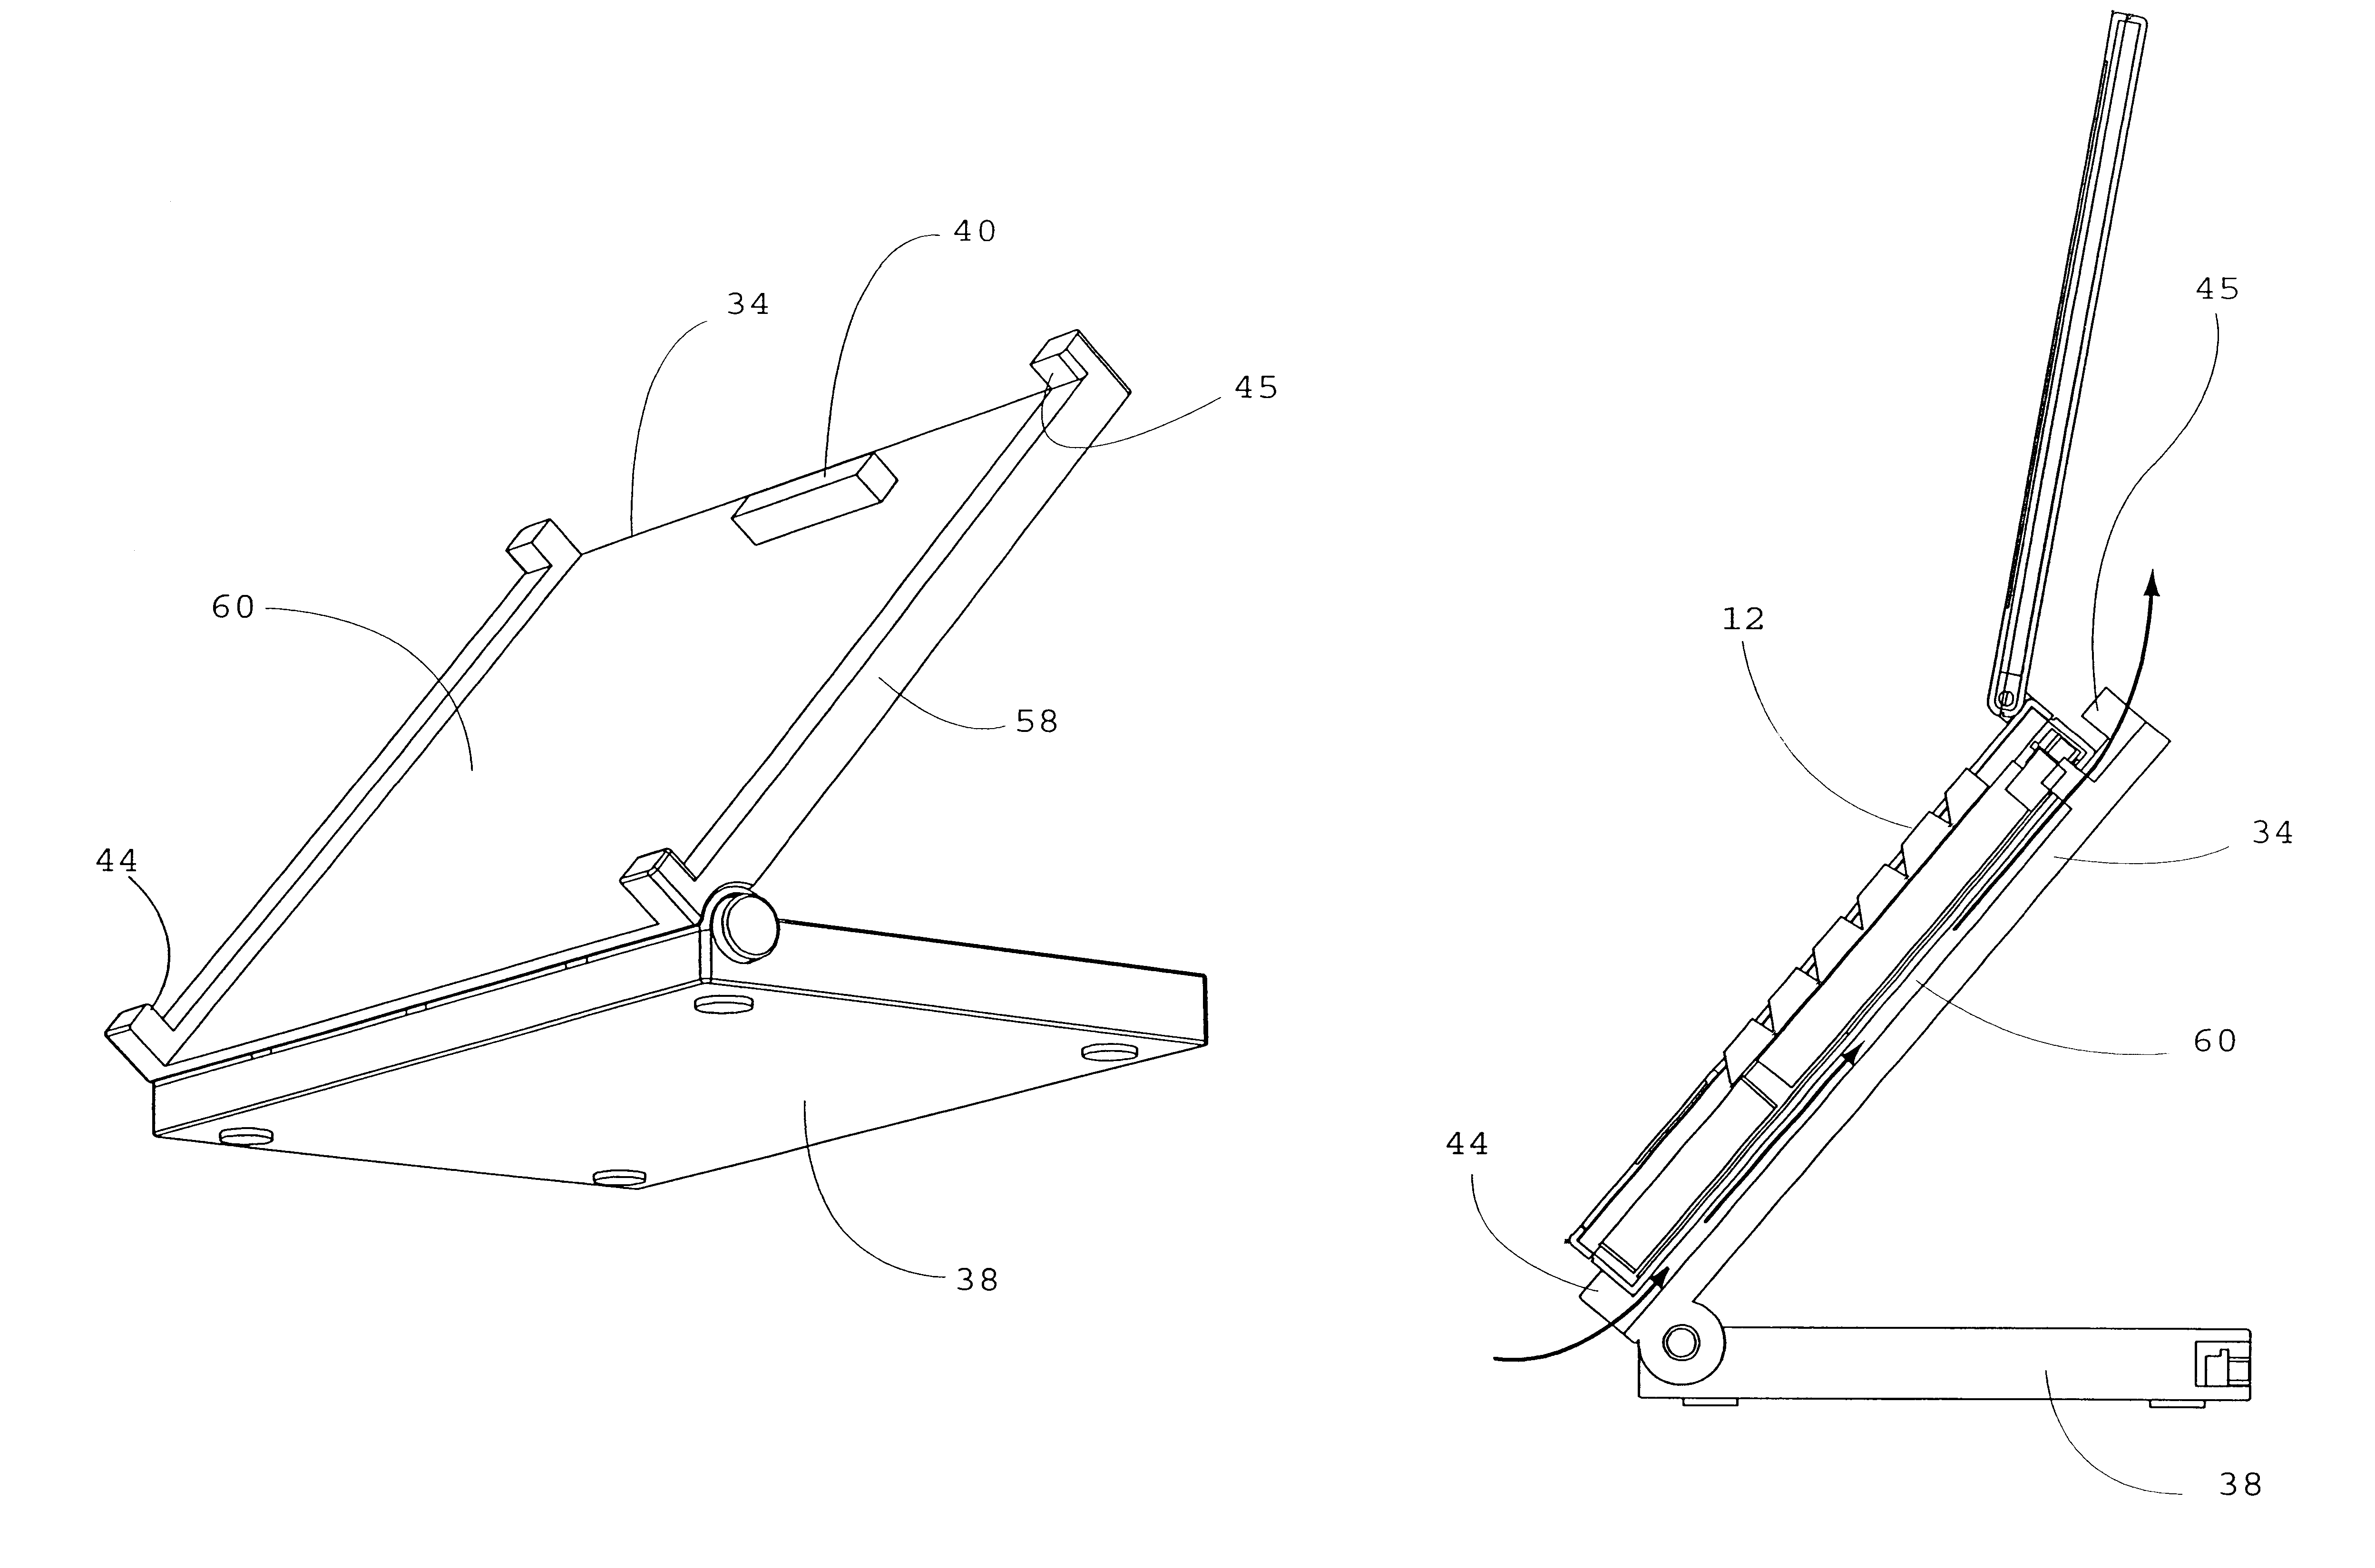 Vertical docking and positioning apparatus for a portable computer